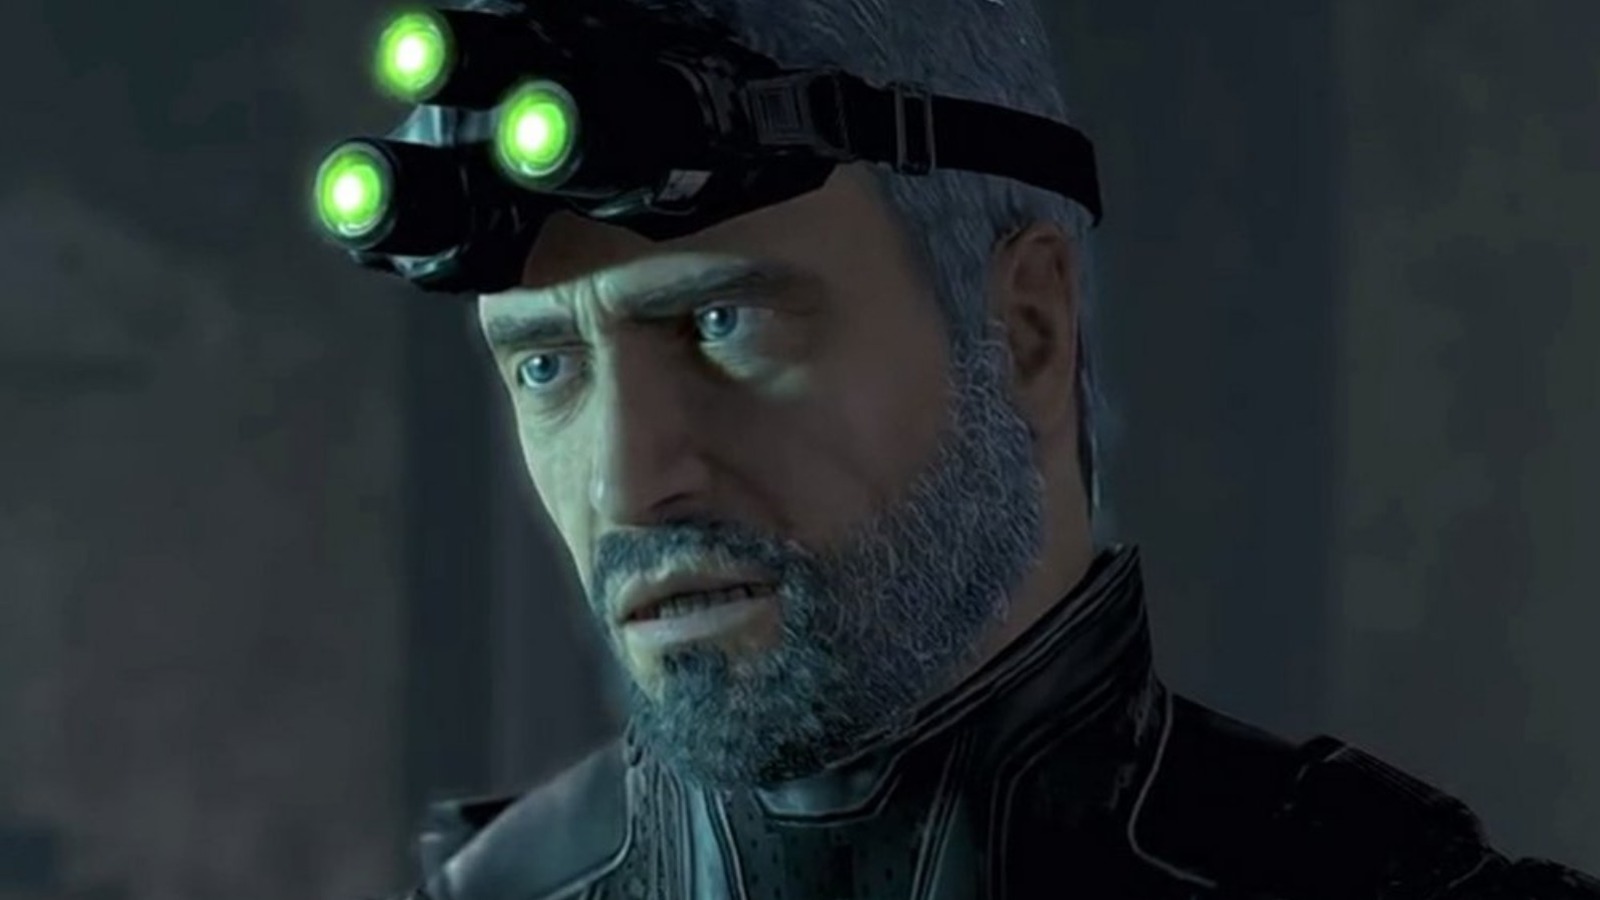 A Splinter Cell game set in the early days of Sam Fischer during the cold  war and the fall of the Soviet Union, anyone? : r/Splintercell